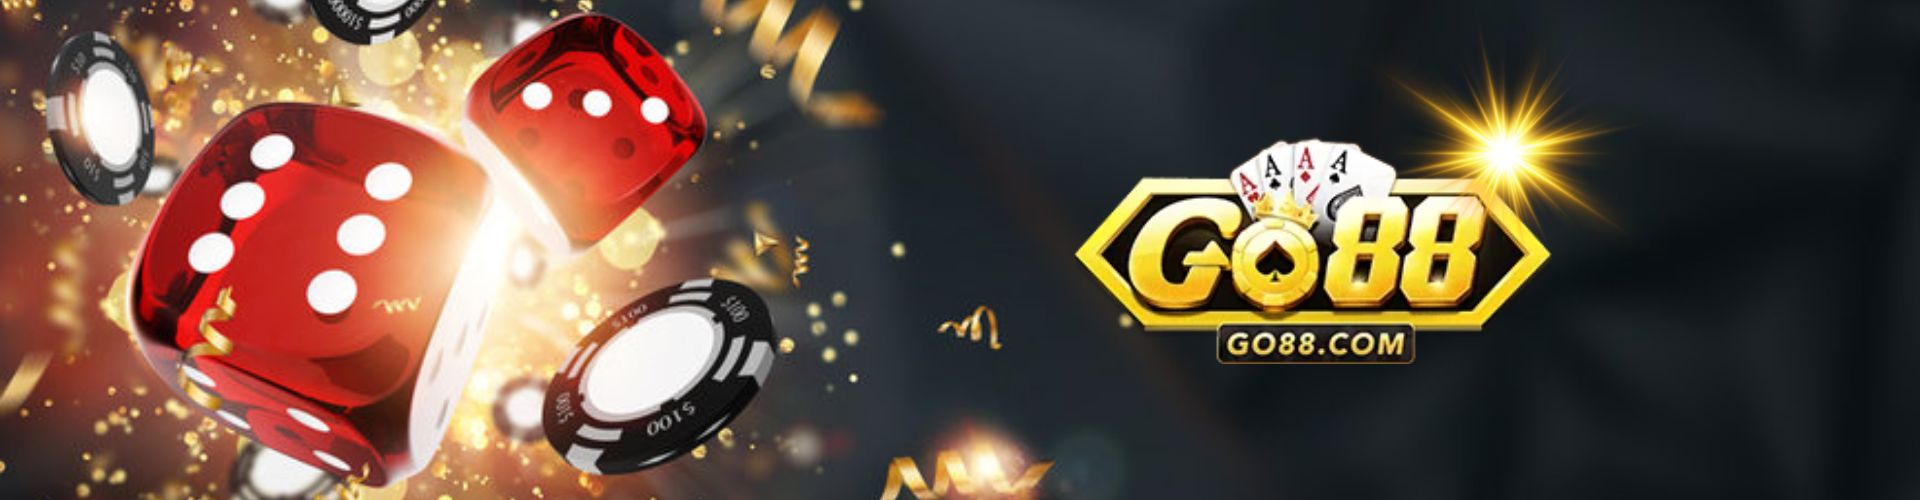 go88-homepage-banner